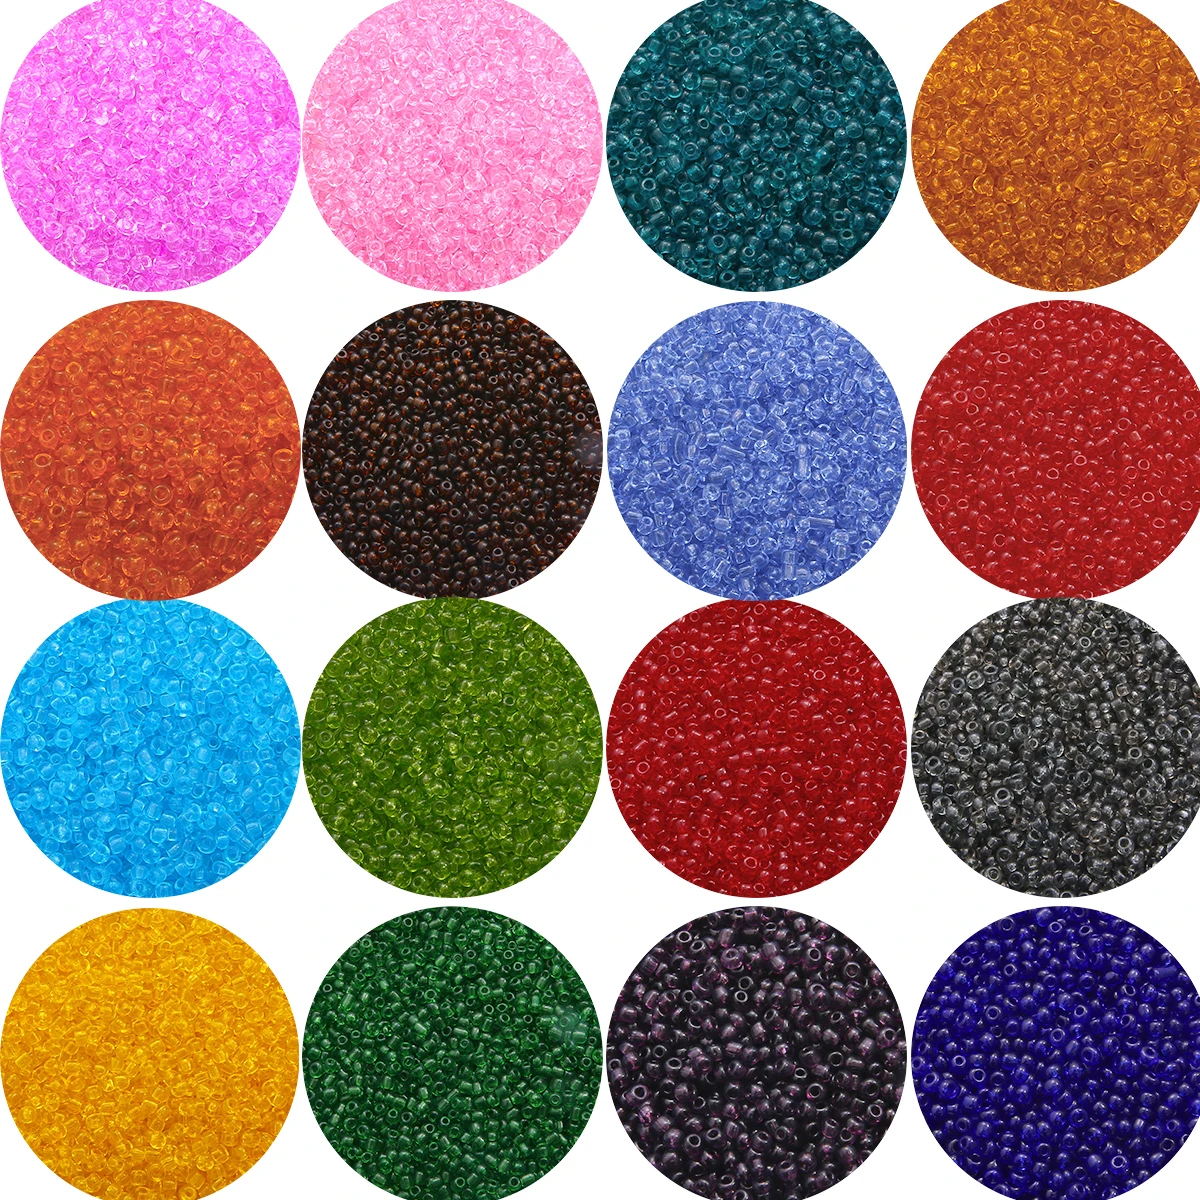 150-1000Pcs/lot 2 3 4mm Japanese Miyuki Round Beads Oiling Transparent Series 15g Glass Ornament DIY Sewing Accessories |